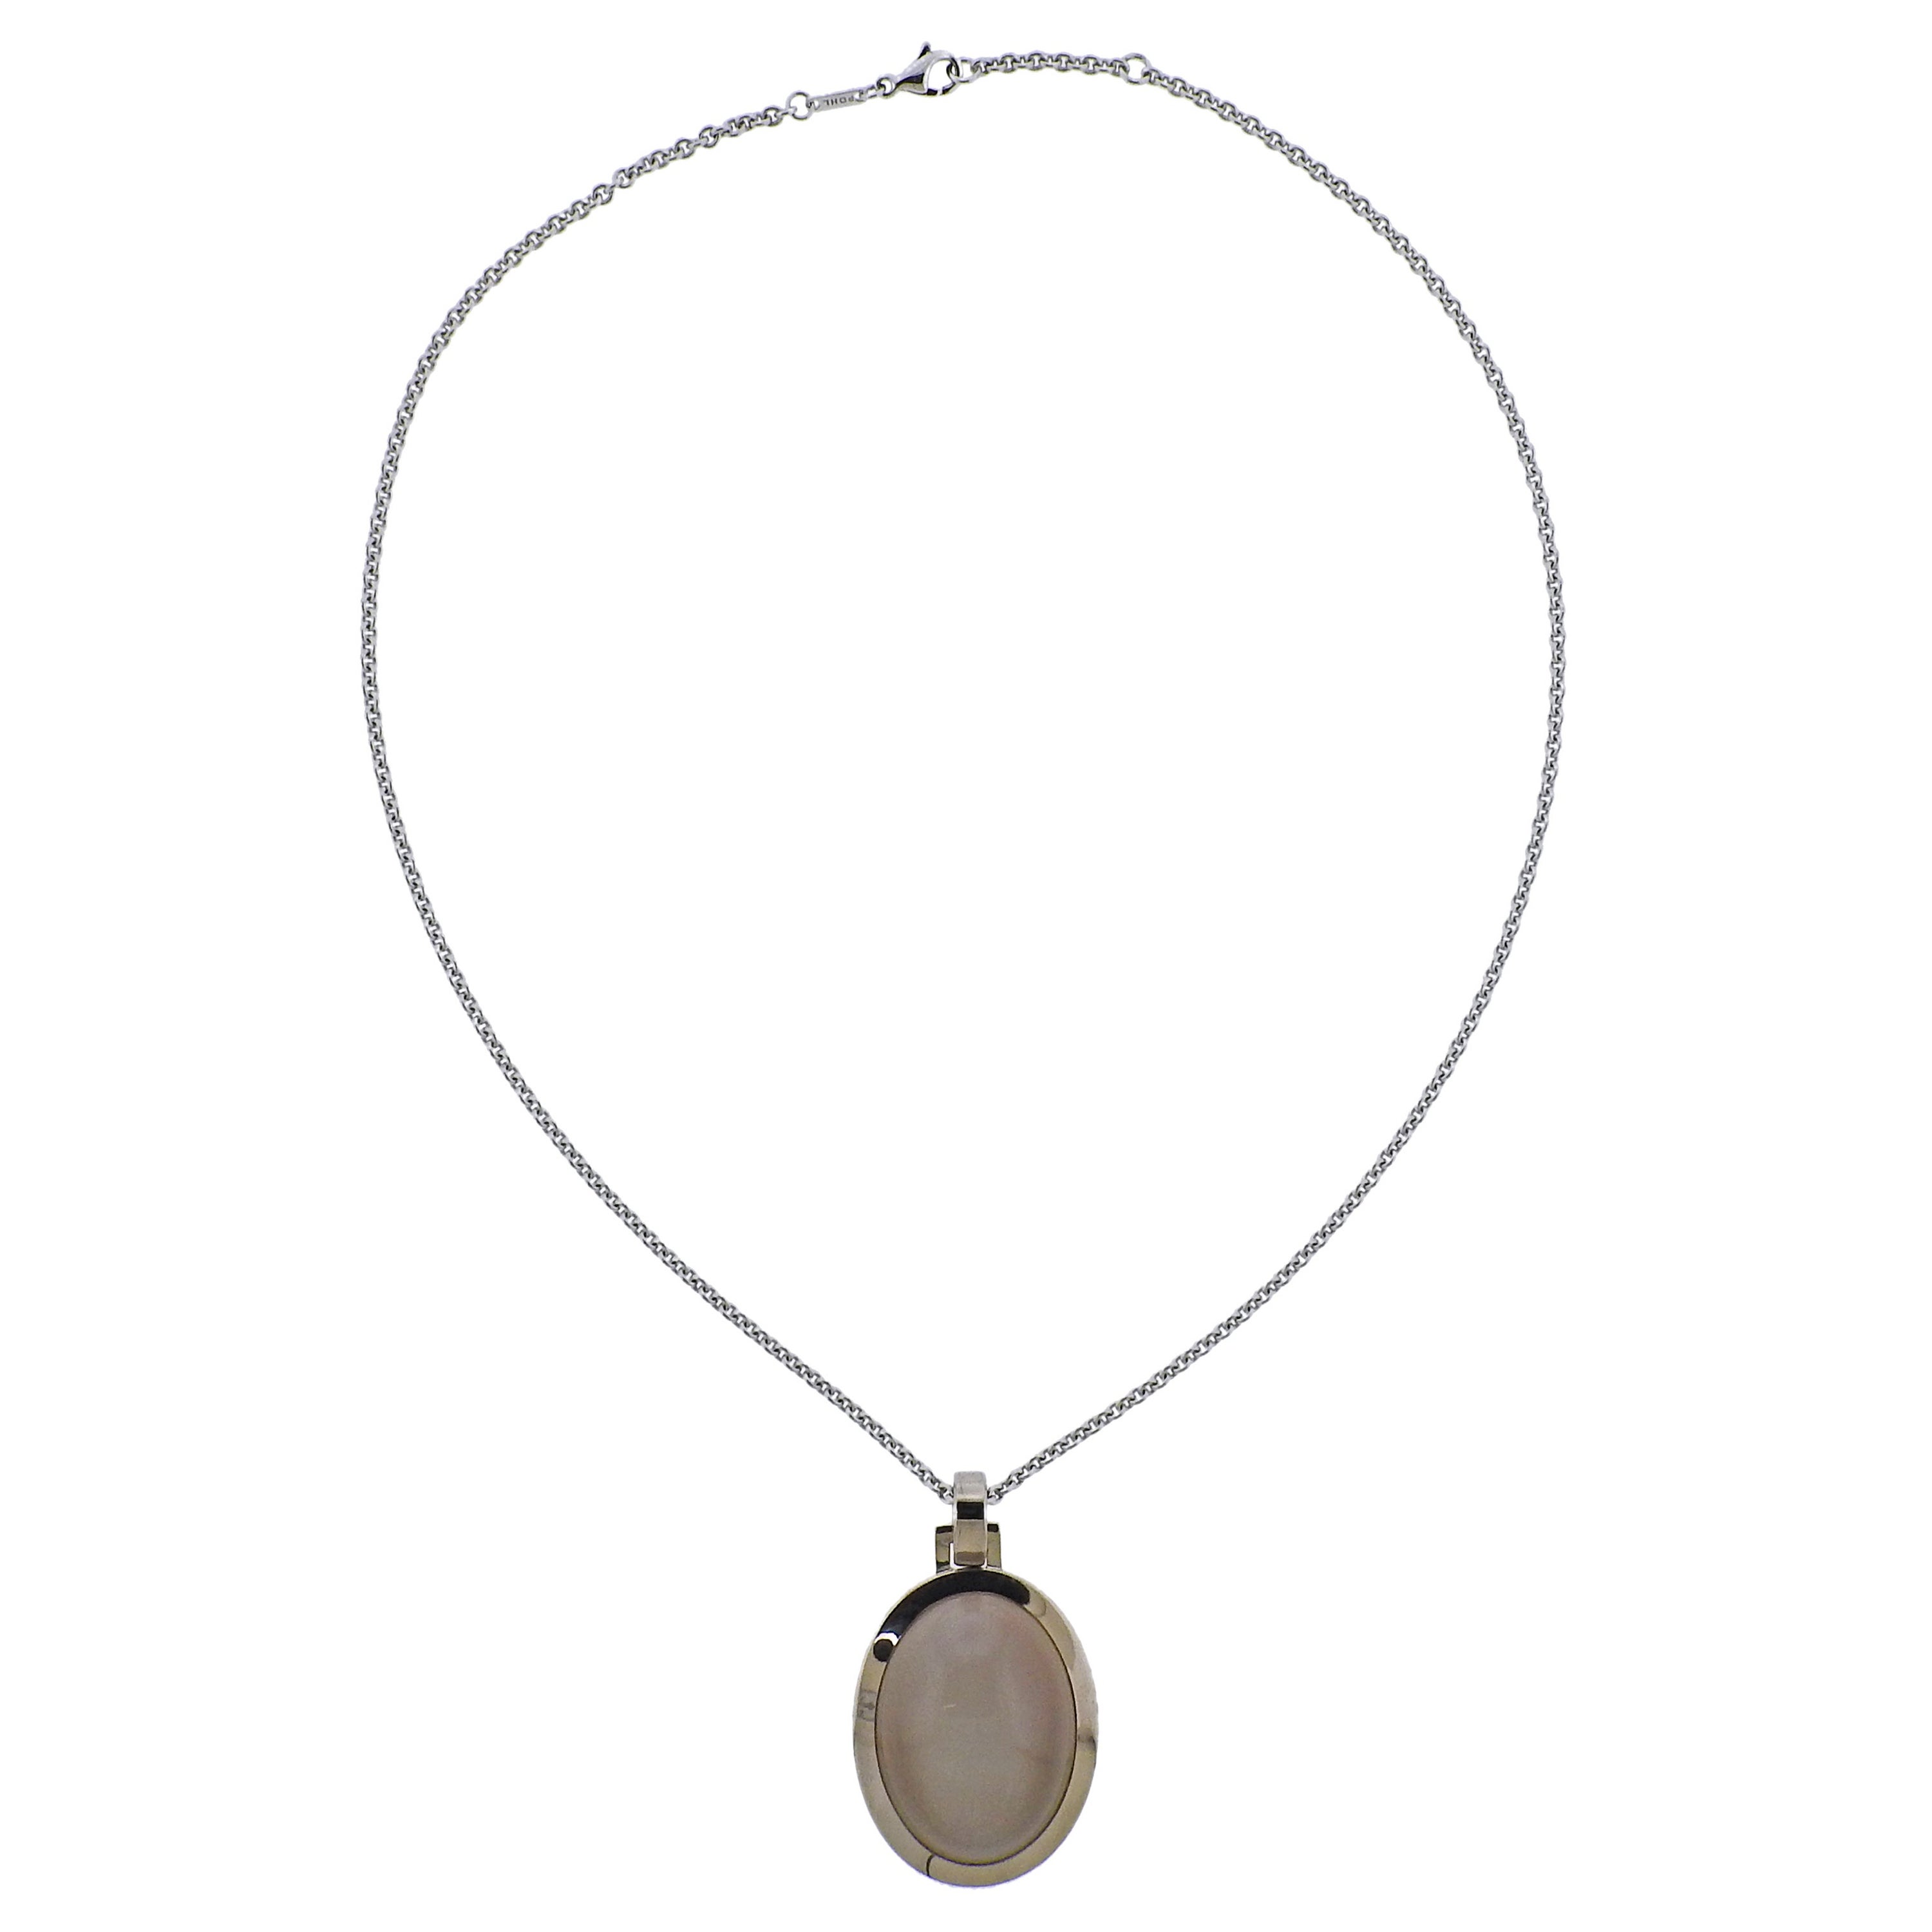 Jochen Pohl 40.44ct Grey Moonstone Gold Pendant Necklace For Sale